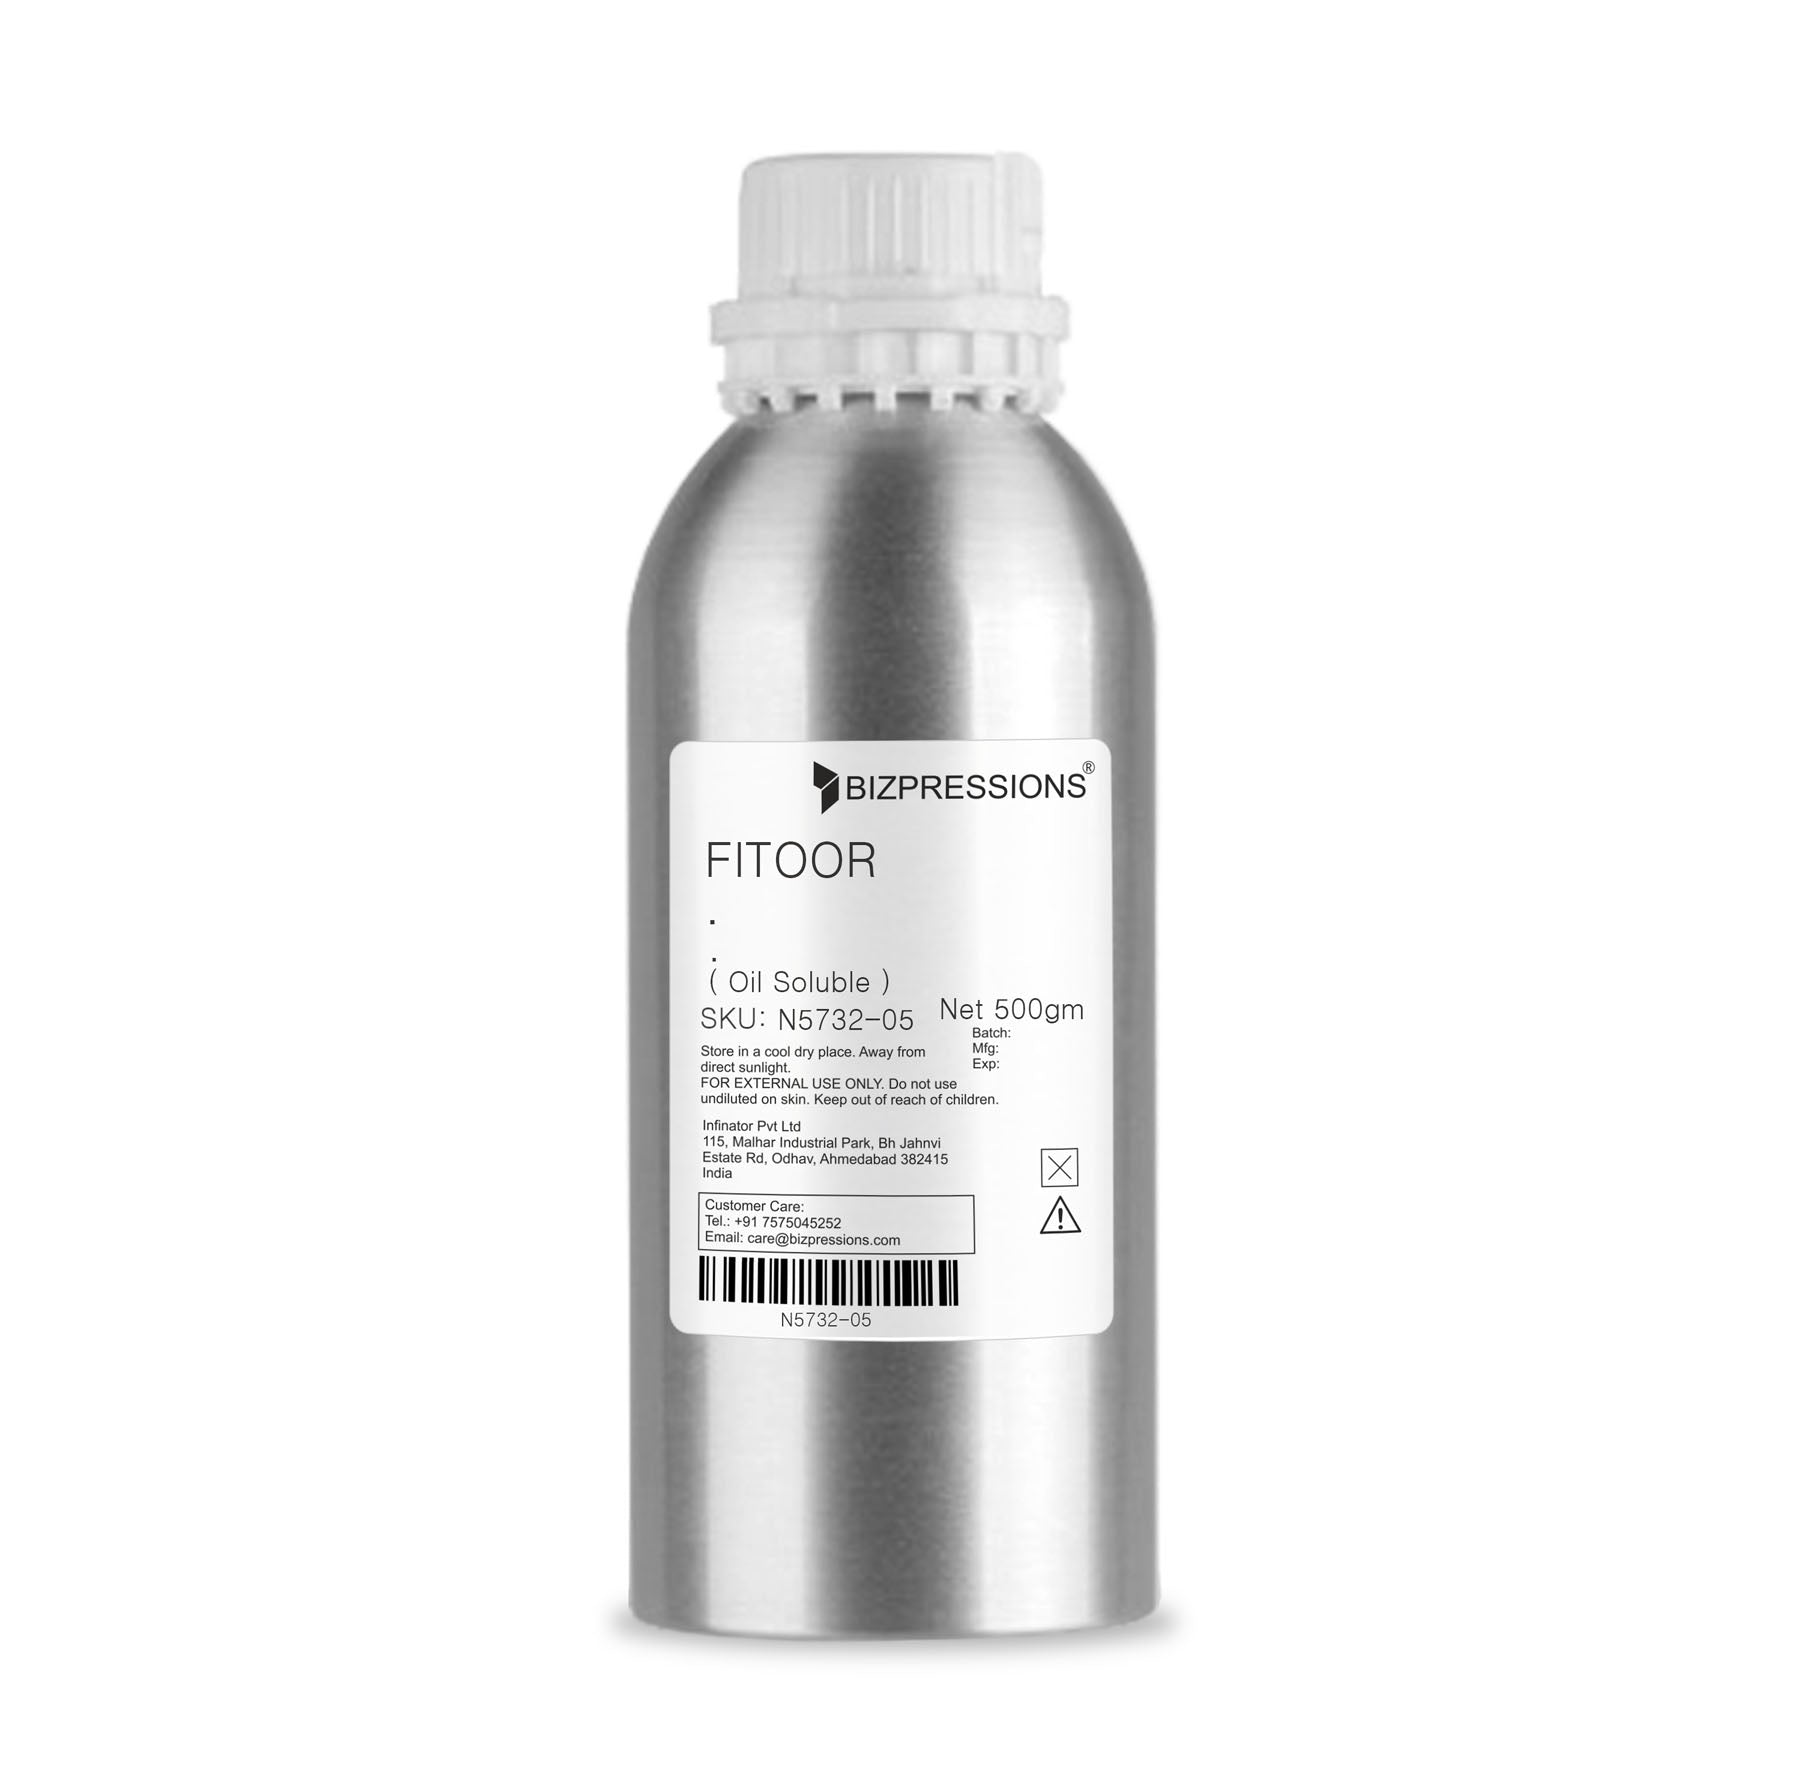 FITOOR - Fragrance ( Oil Soluble ) - 500 gm